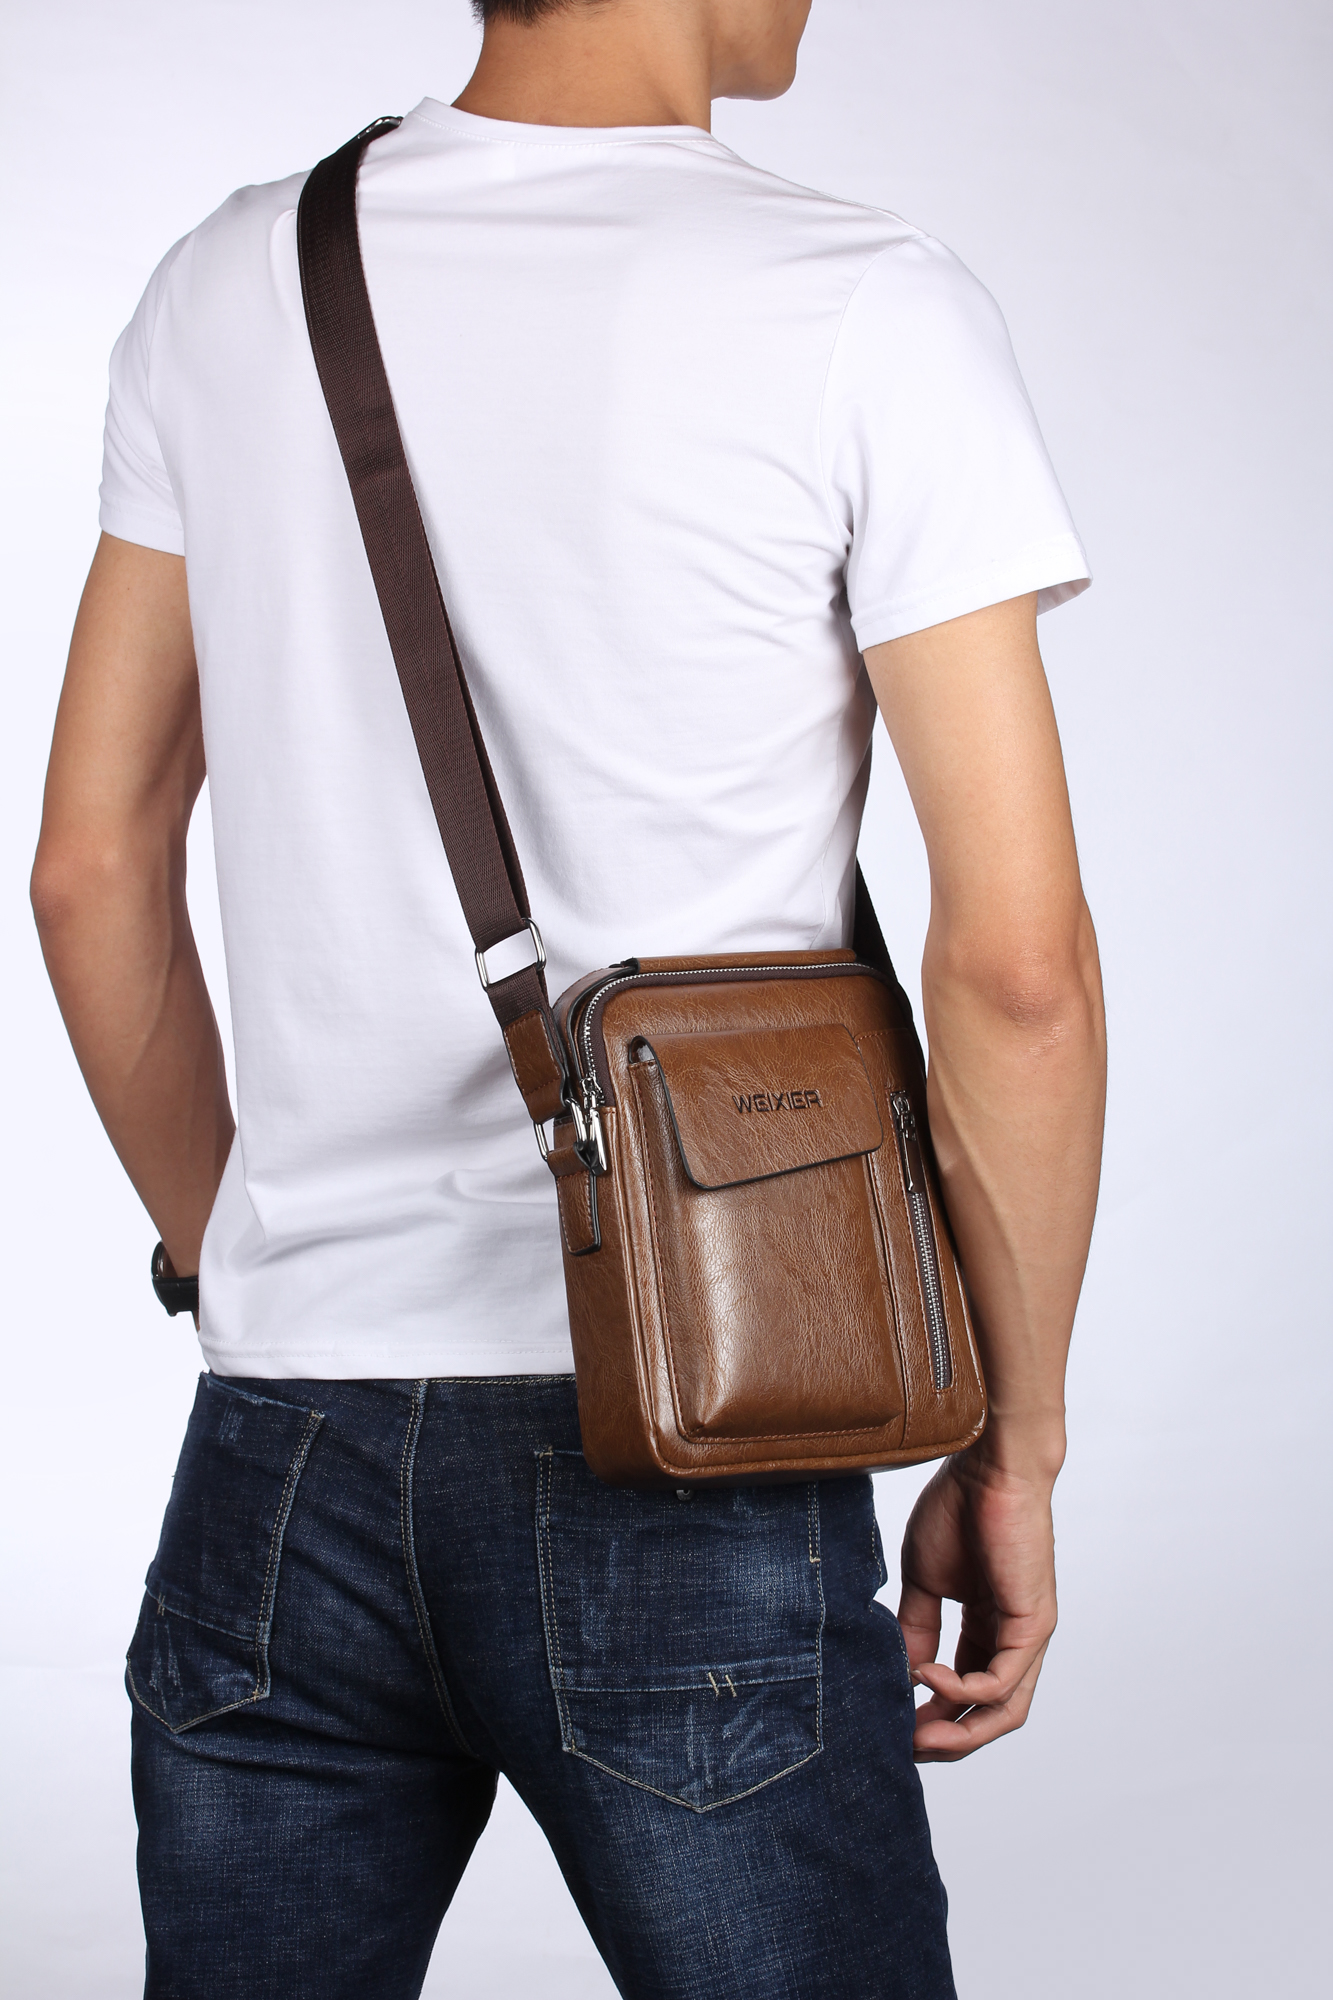 Weixier Leather Cross Body Travel Business Leisure for Men